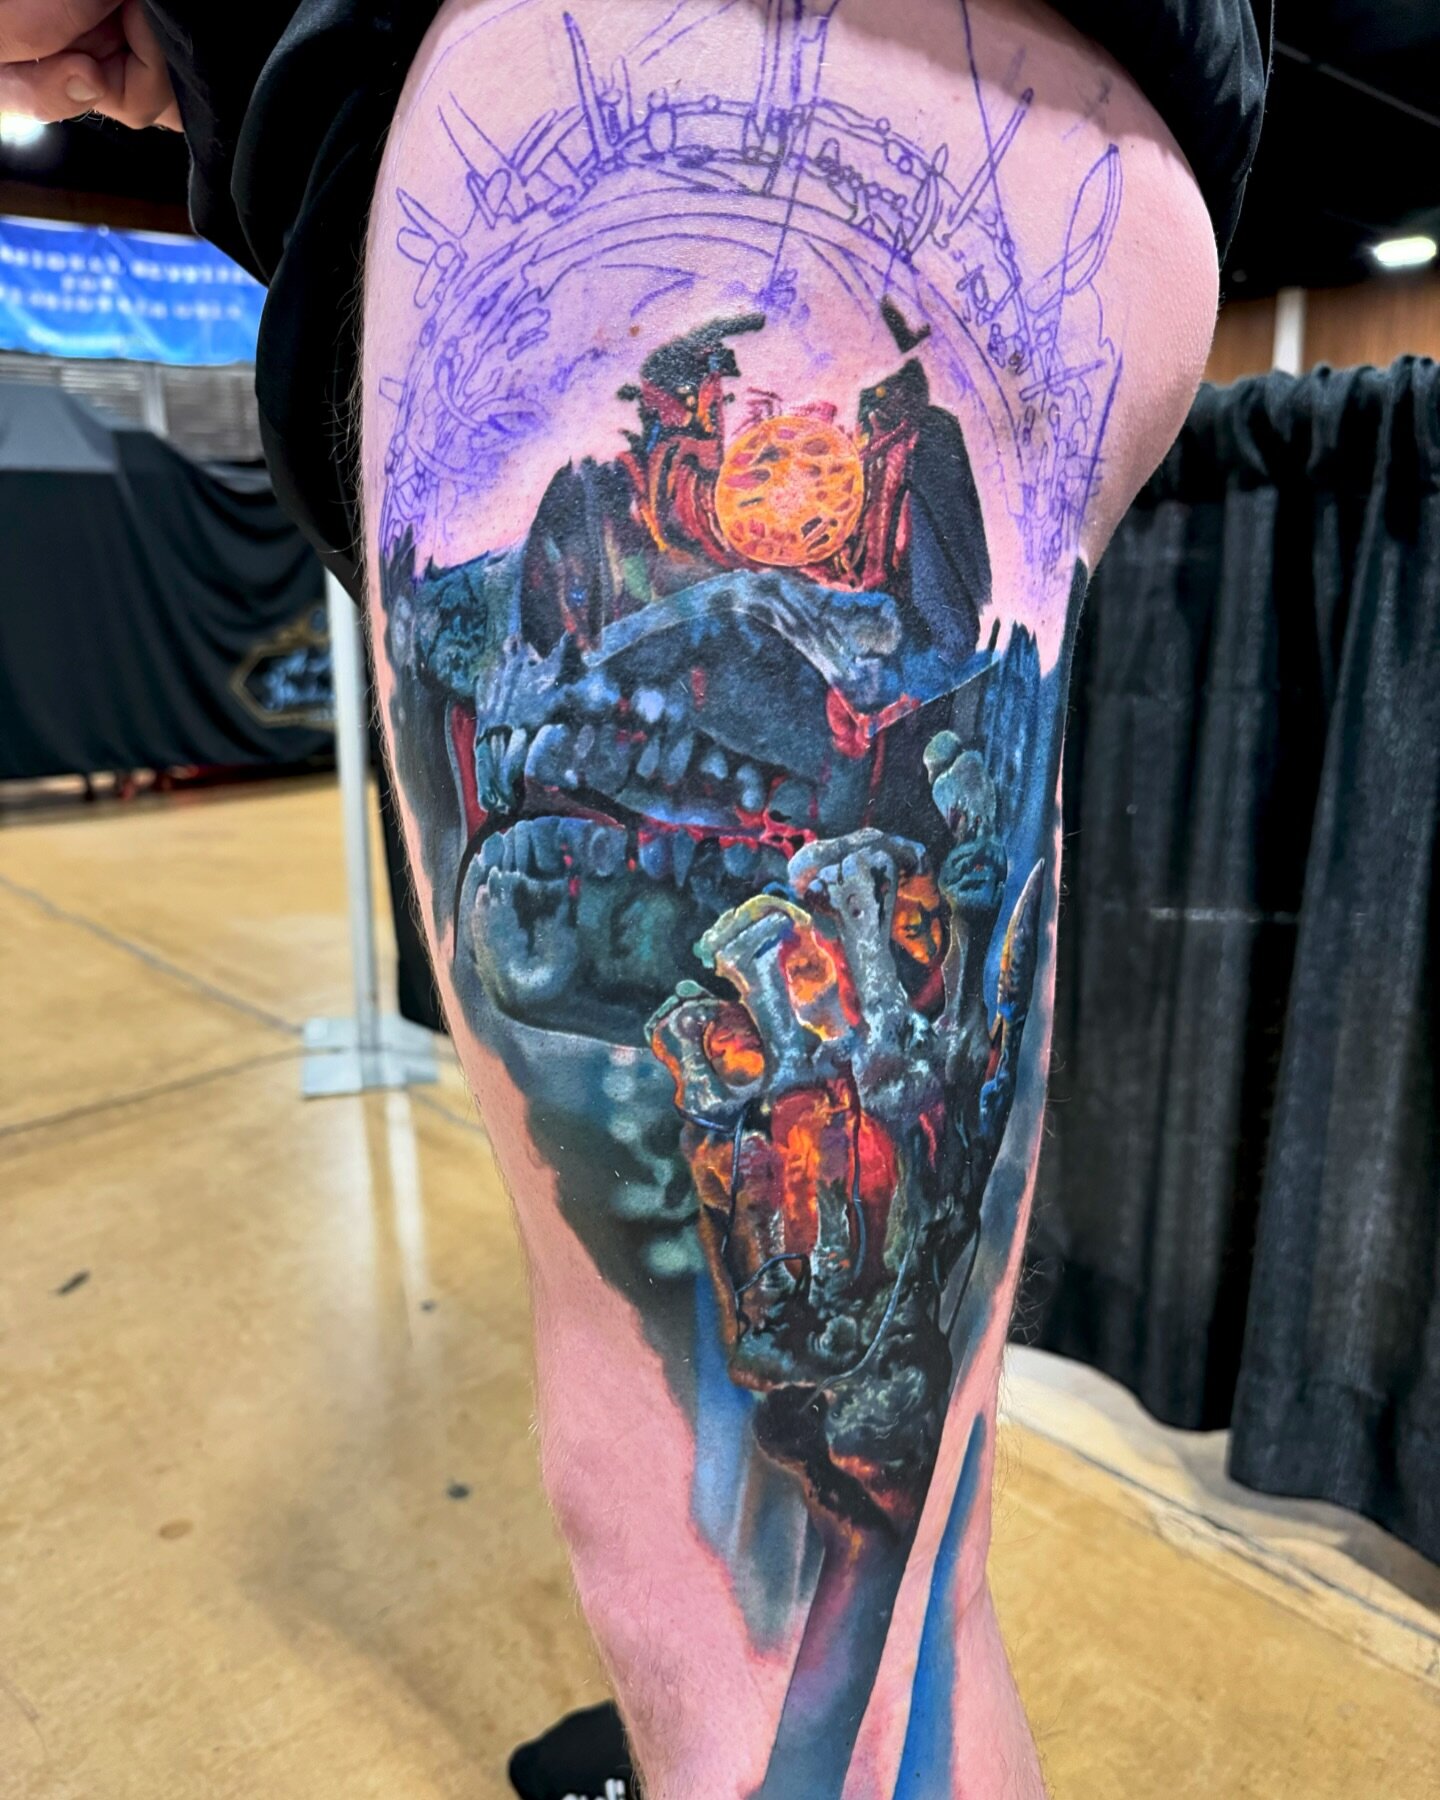 So happy to get to do one of my #premadedesigns this year at the best #tattooconvention @evergreentattooinvitational . Although we didn&rsquo;t finish it was a fun time! Until next year @bobbitnertattoo 🫡🤣🤣🤣🤣 Done using @empireinks @hustlebutter